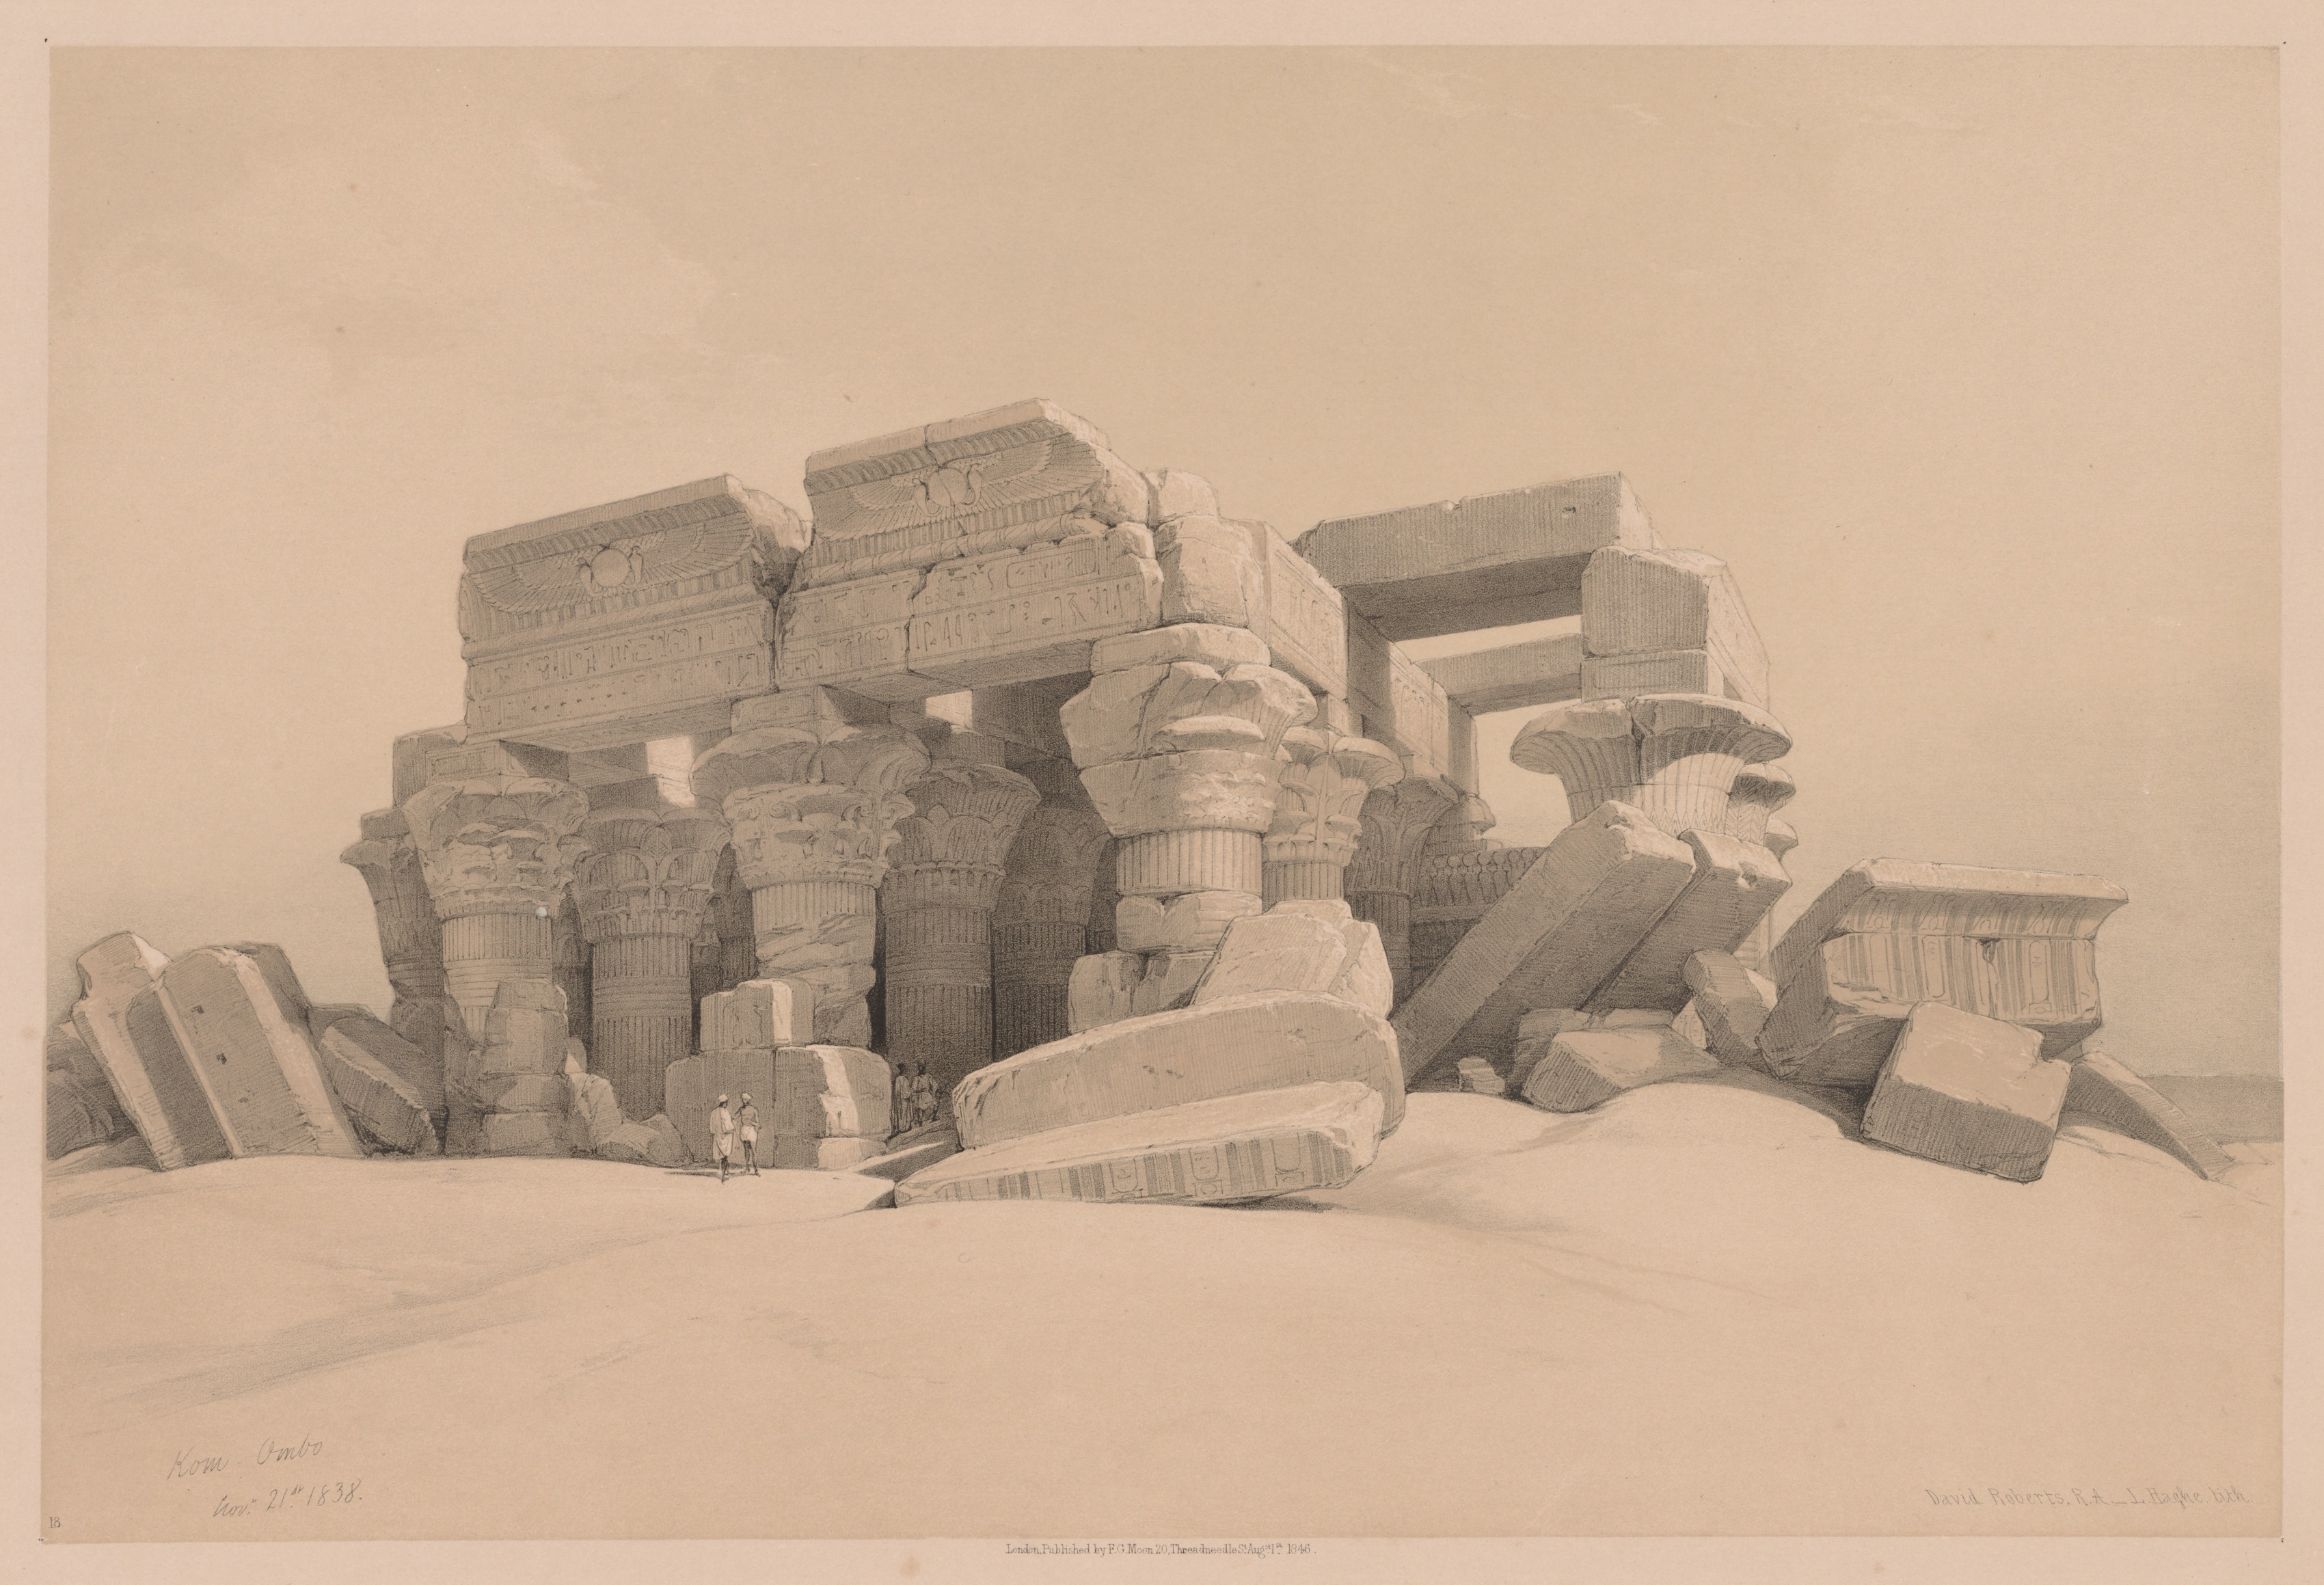 Egypt and Nubia:  Volume I - No. 1, No. 2, Remains of the Portico of the Temple of Kom Ombo